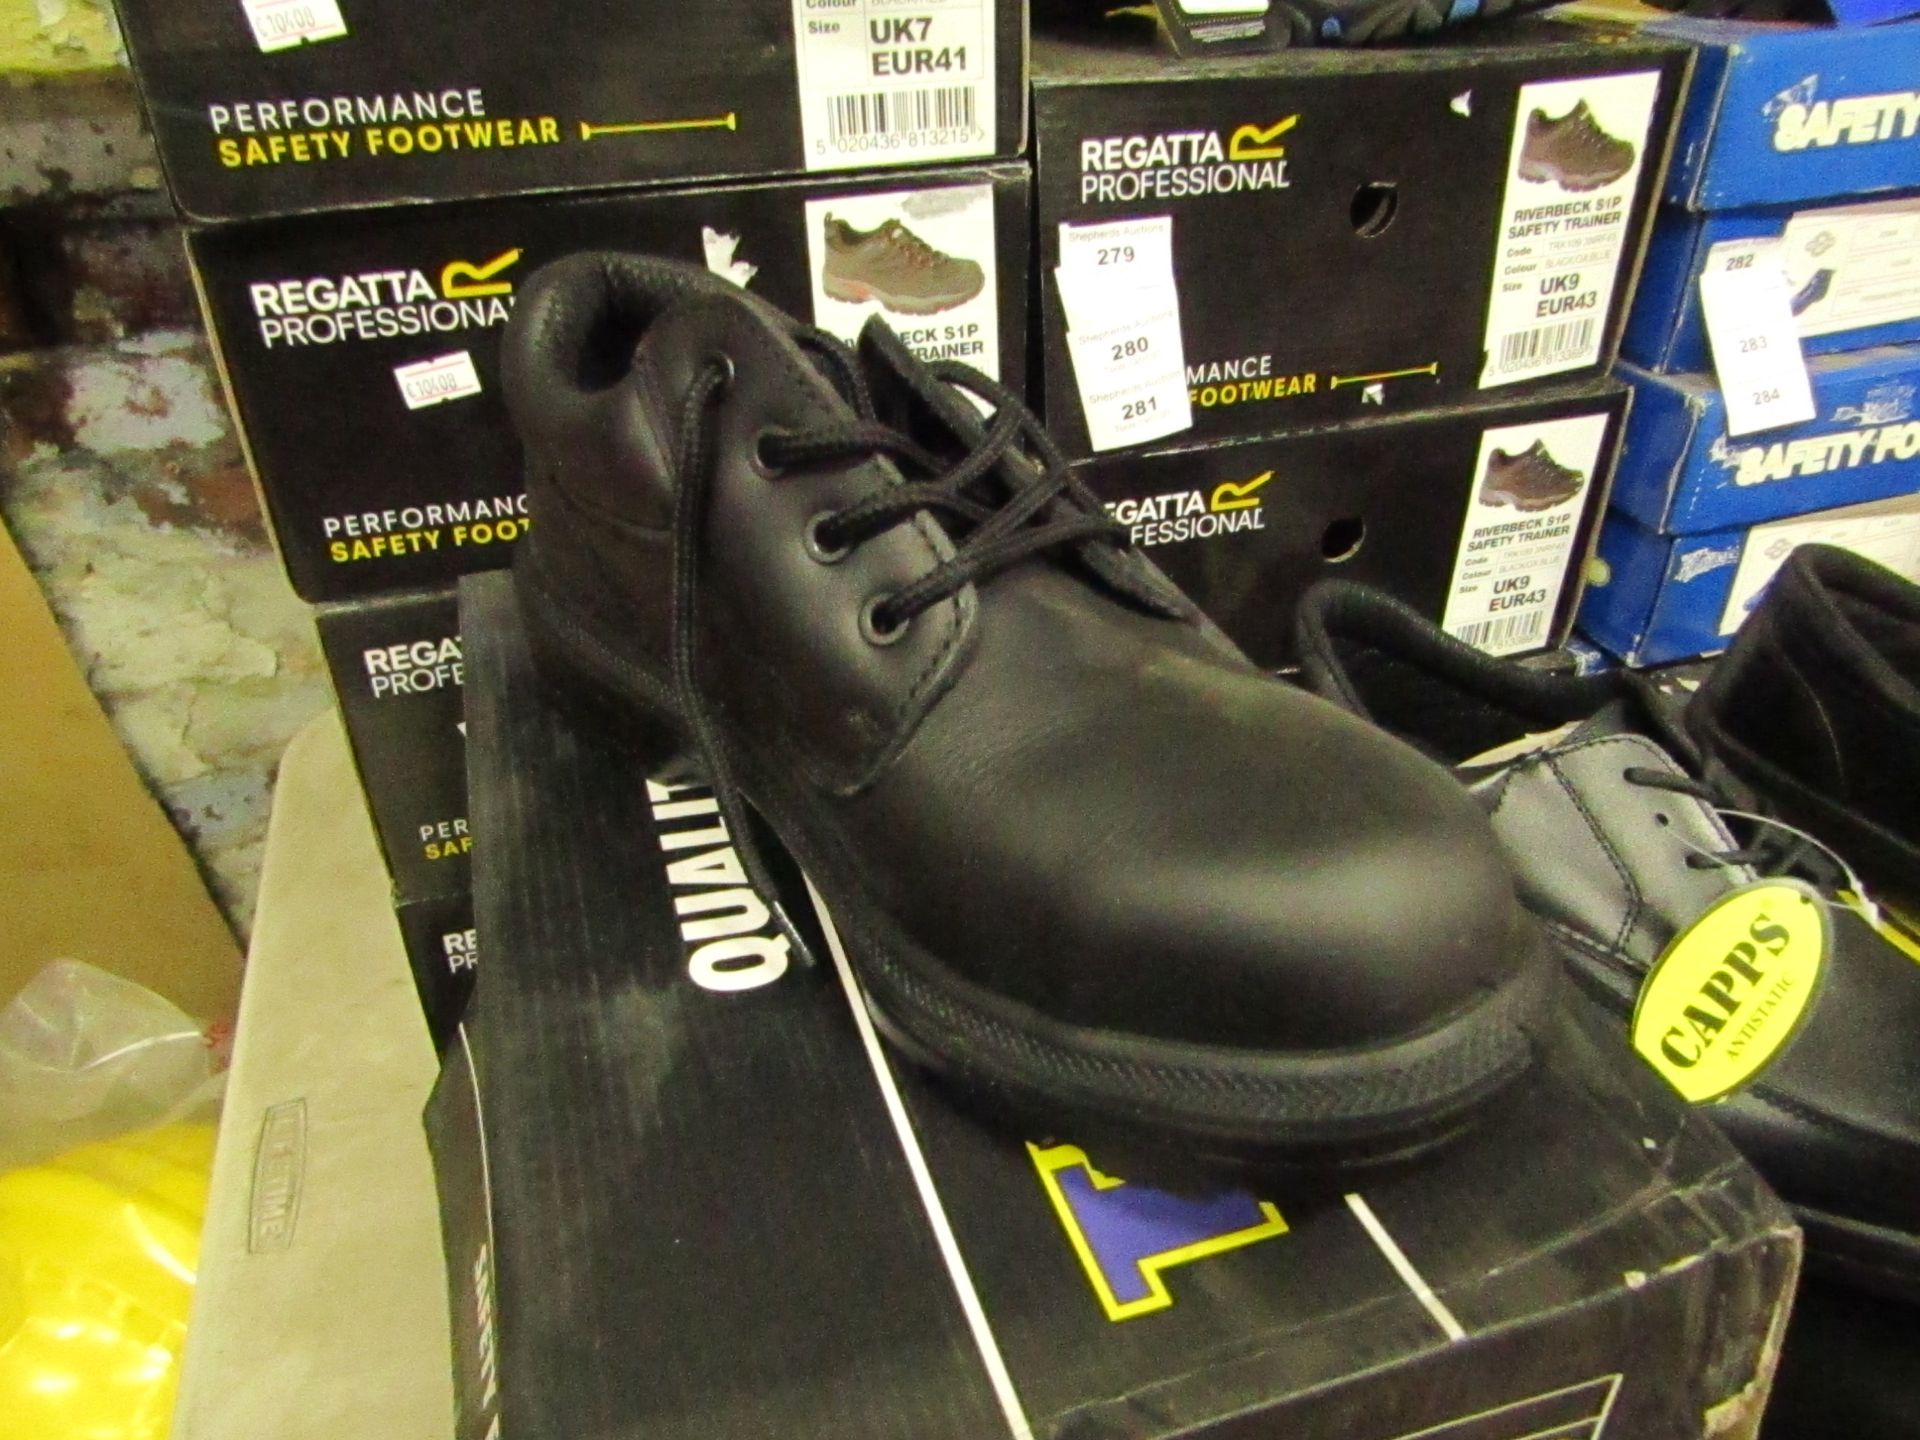 Tuffking safety steel toe-cap shoes, size 6, new and boxed.